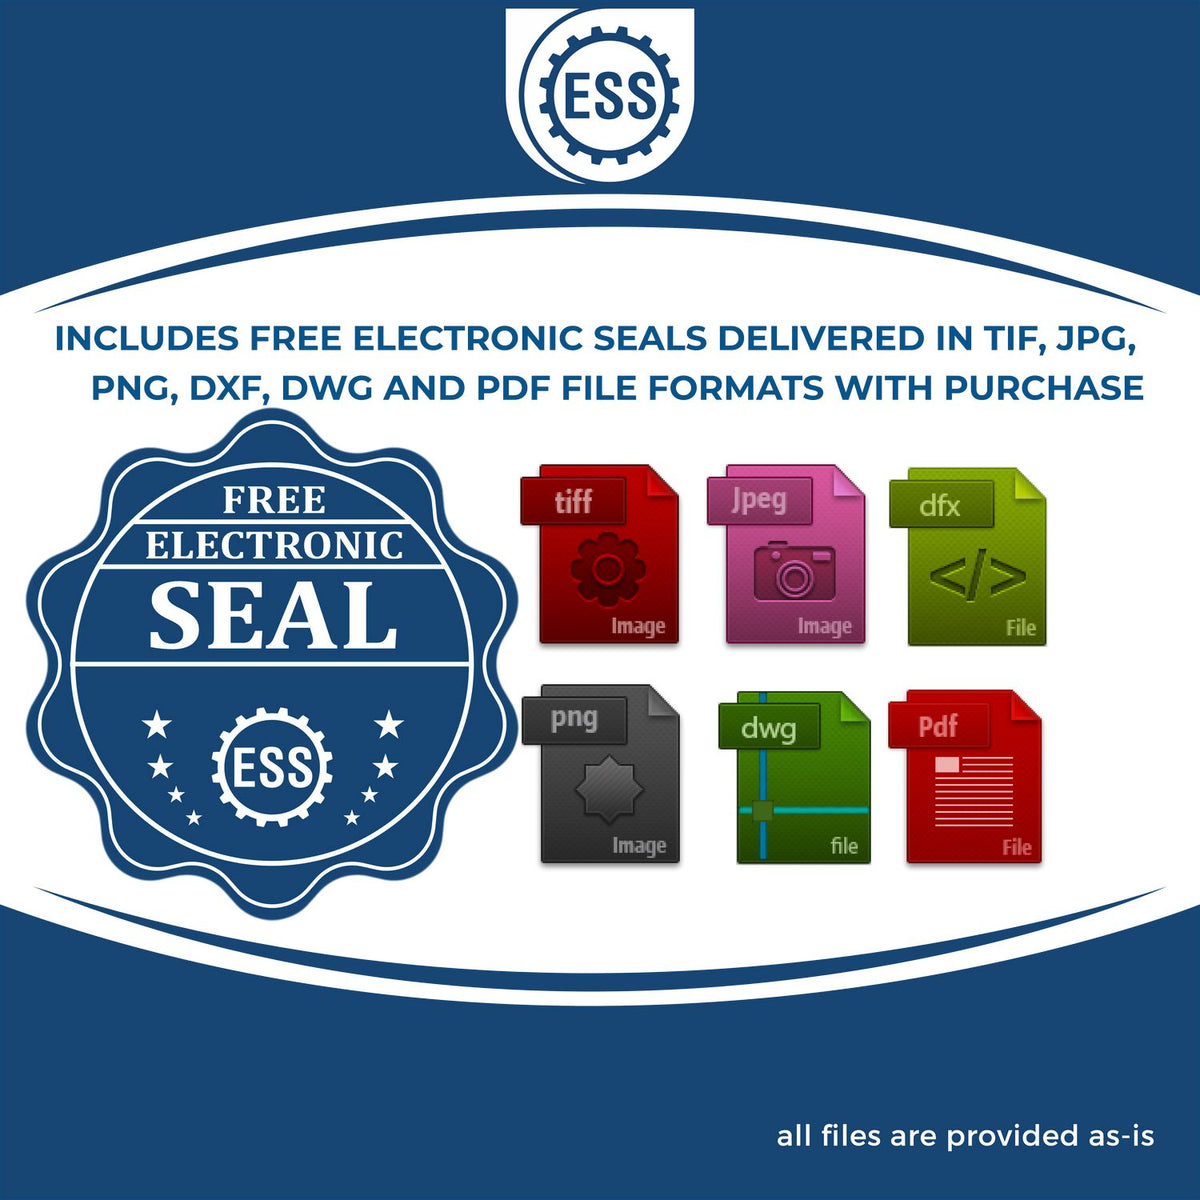 An infographic for the free electronic seal for the Hybrid Kansas Geologist Seal illustrating the different file type icons such as DXF, DWG, TIF, JPG and PNG.